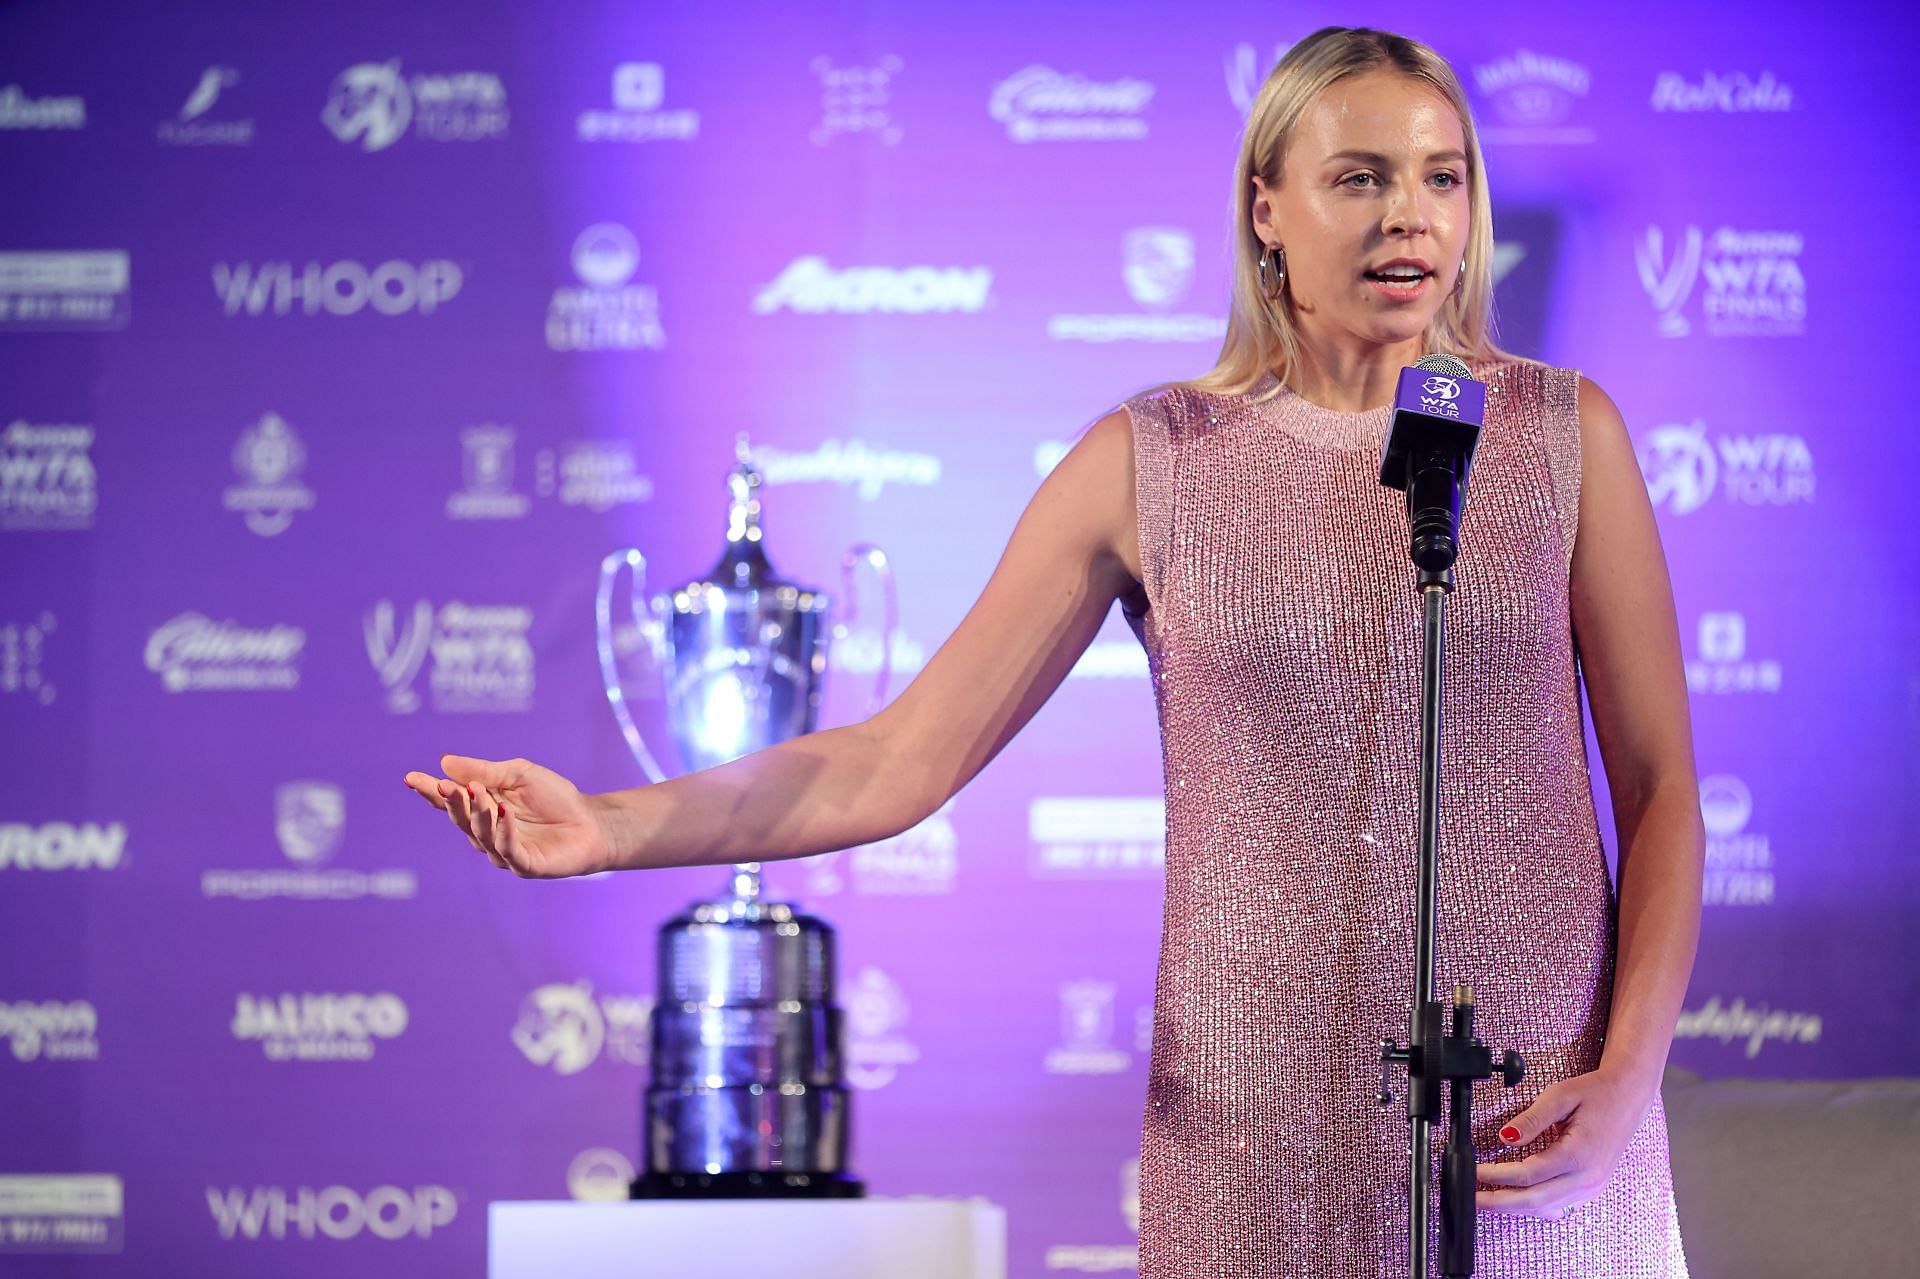 Anett Kontaveit ahead of the 2021 WTA Finals